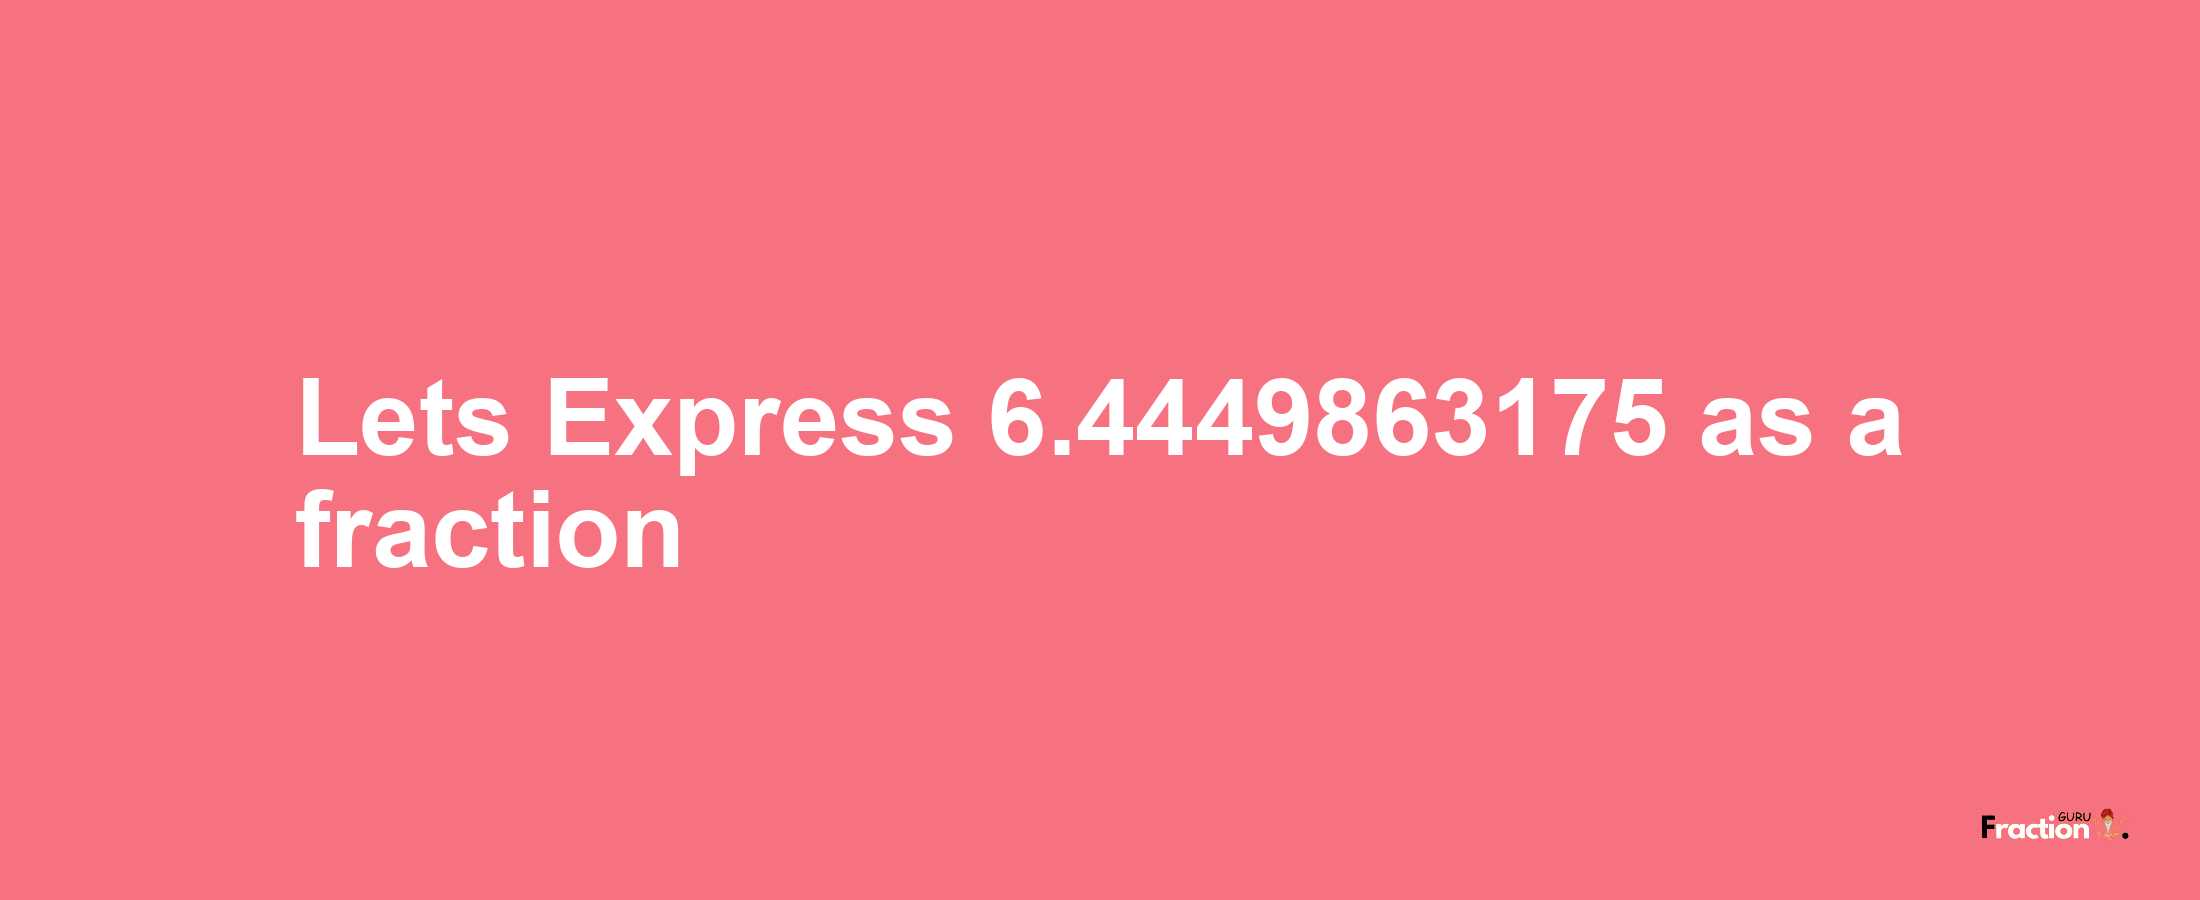 Lets Express 6.4449863175 as afraction